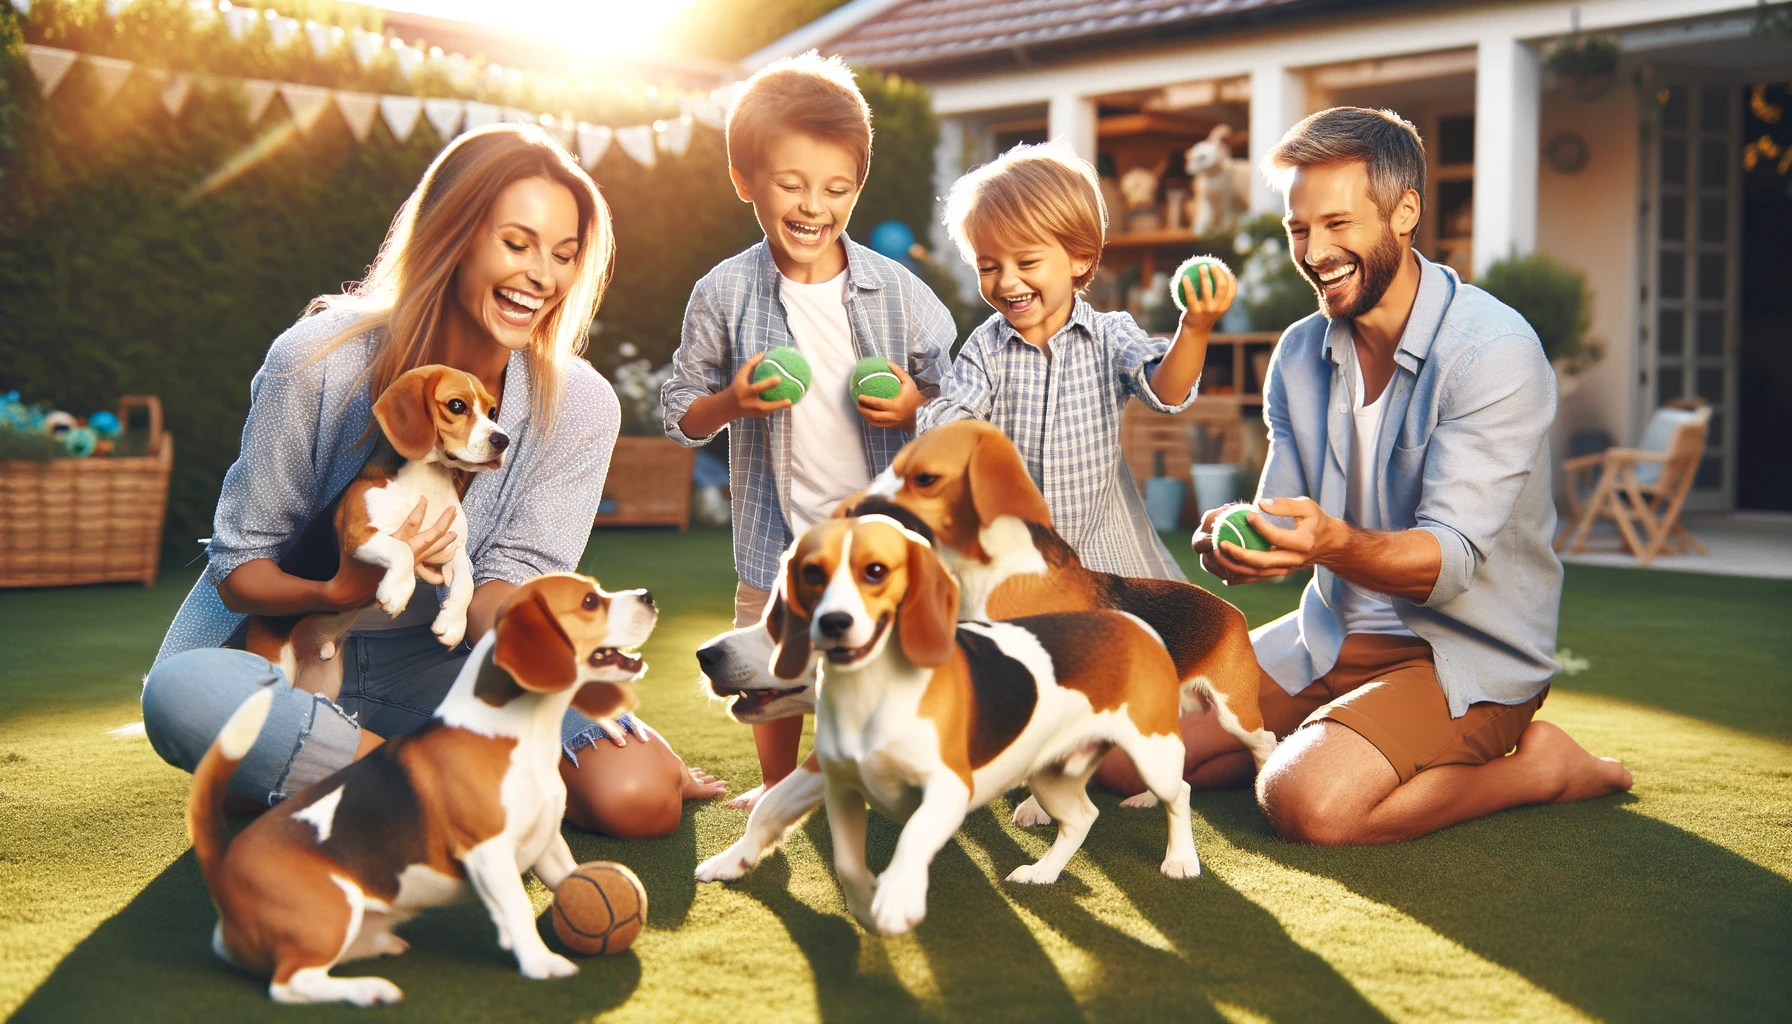 joyful family playtime session with their beagle dogs